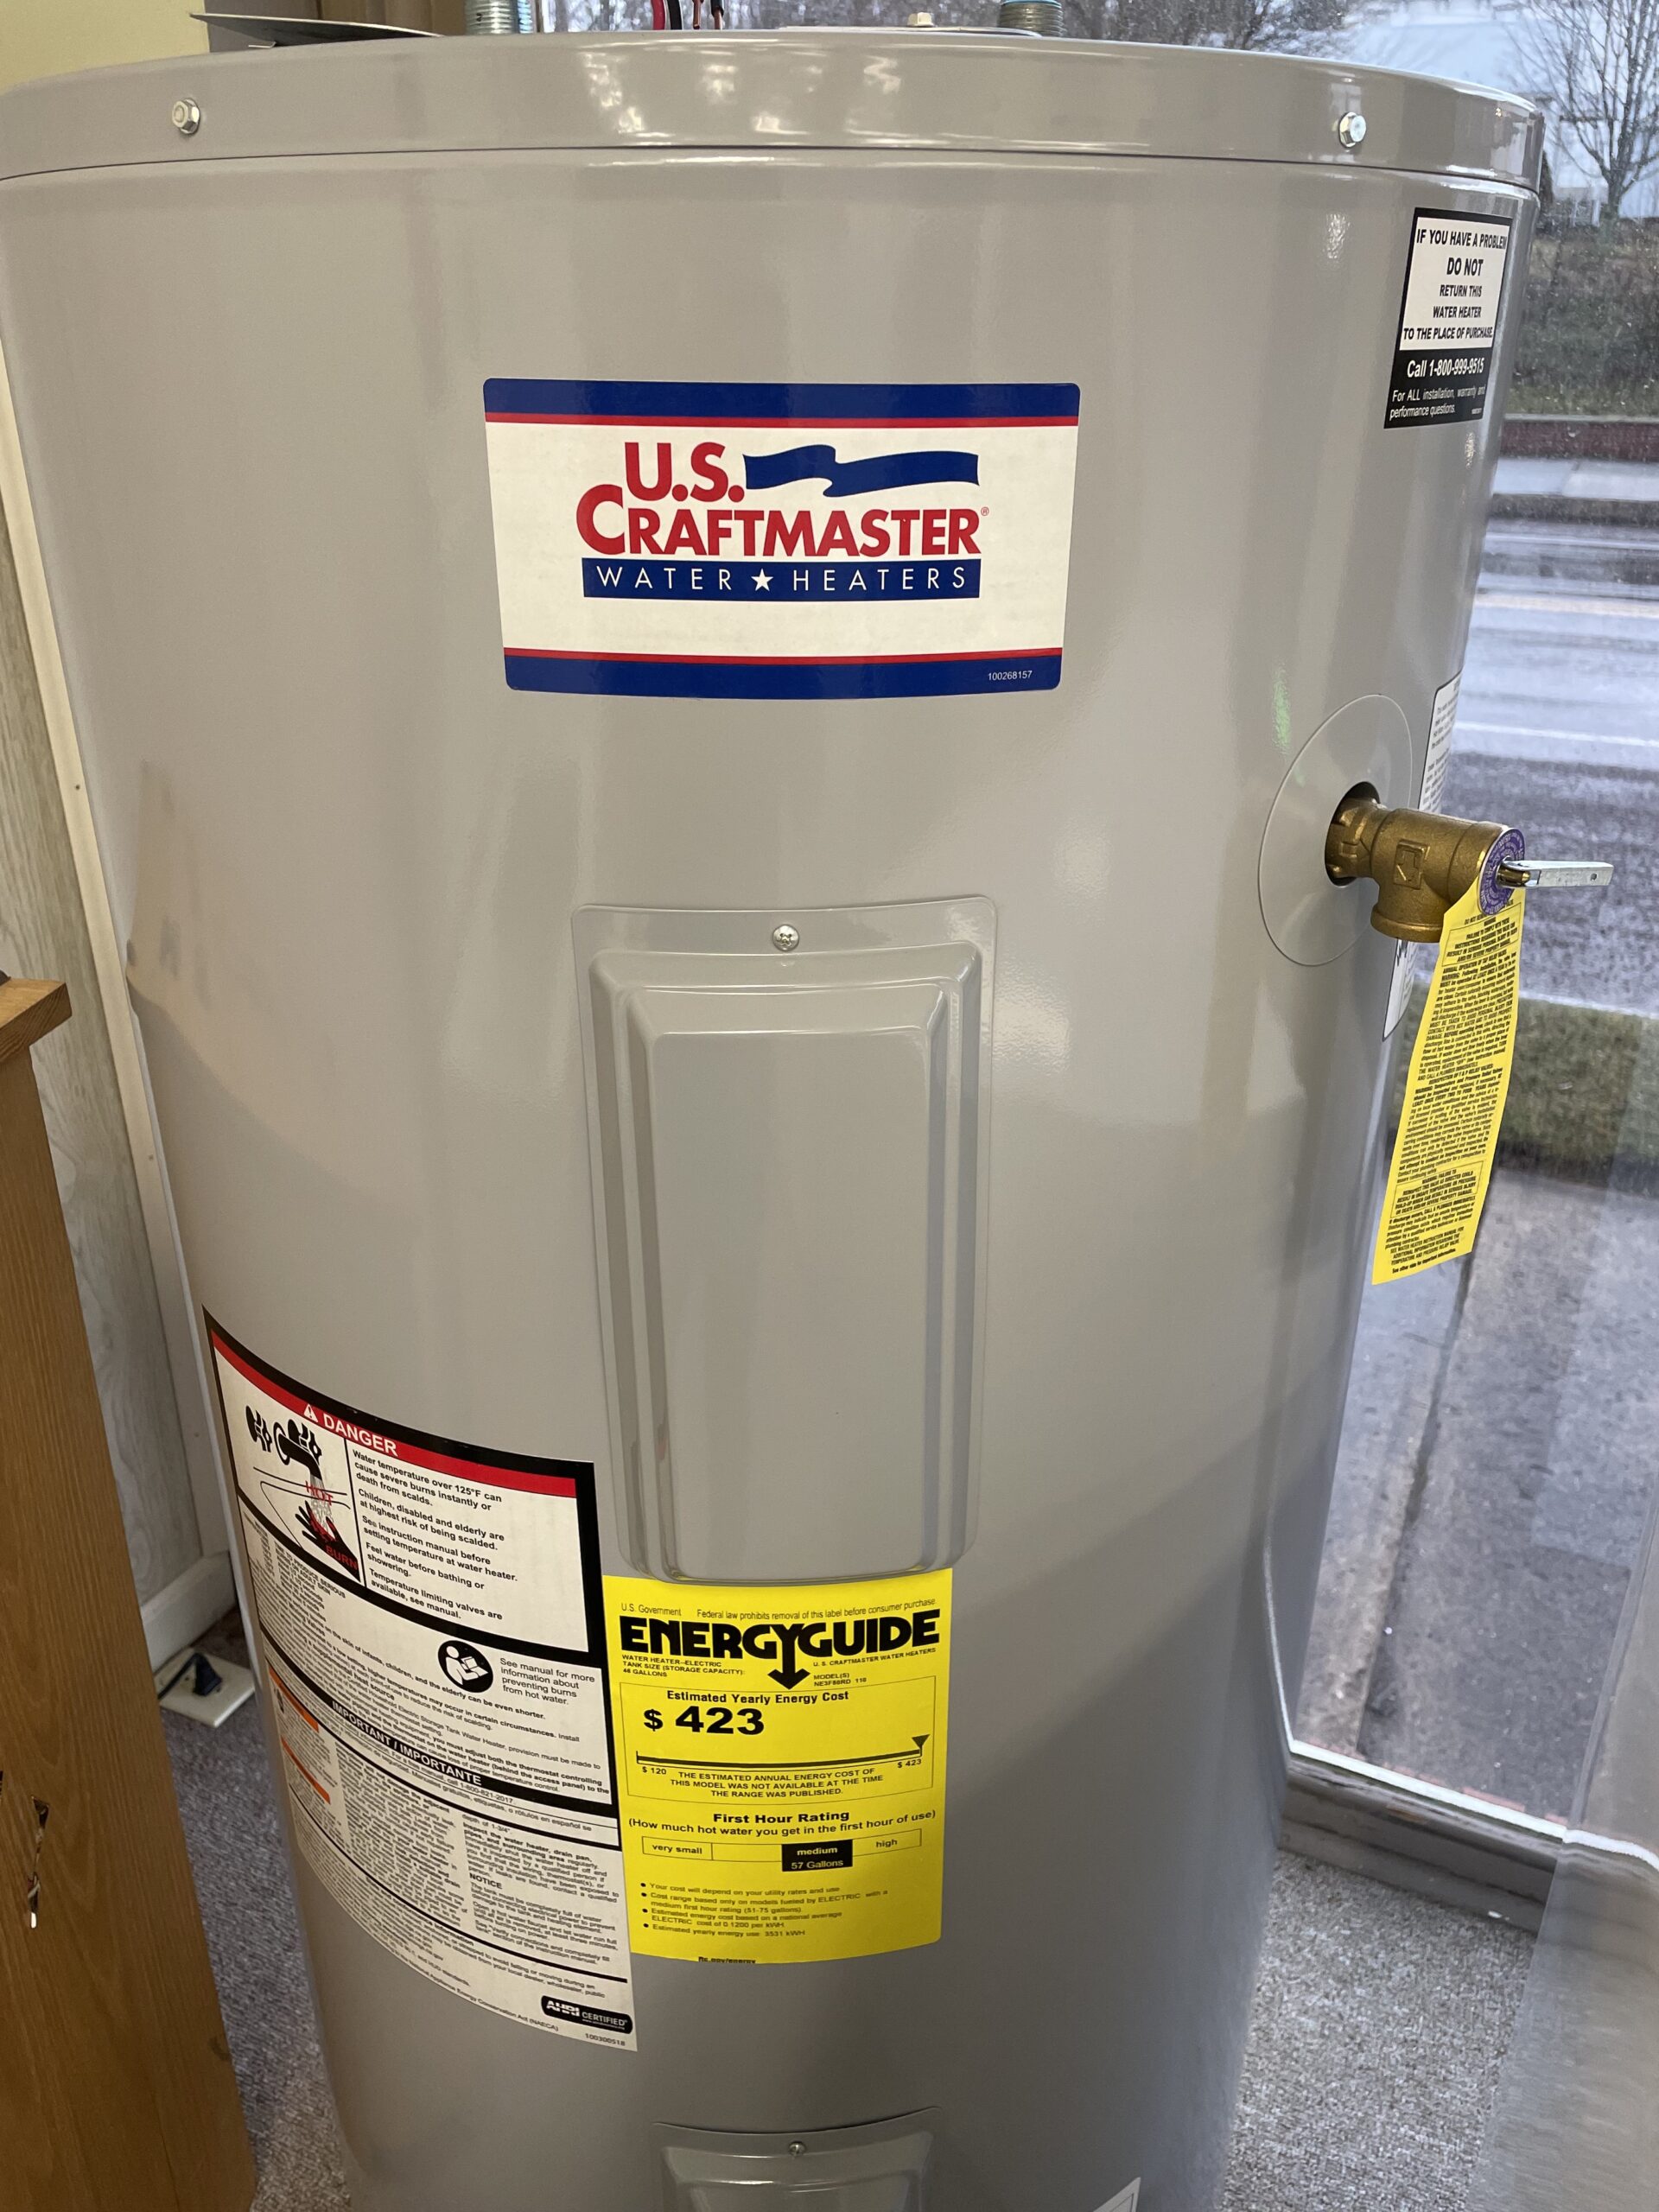 US Craftmaster Electric Water Heater Highpoiint Appliances Meyersdale Pa Scaled 